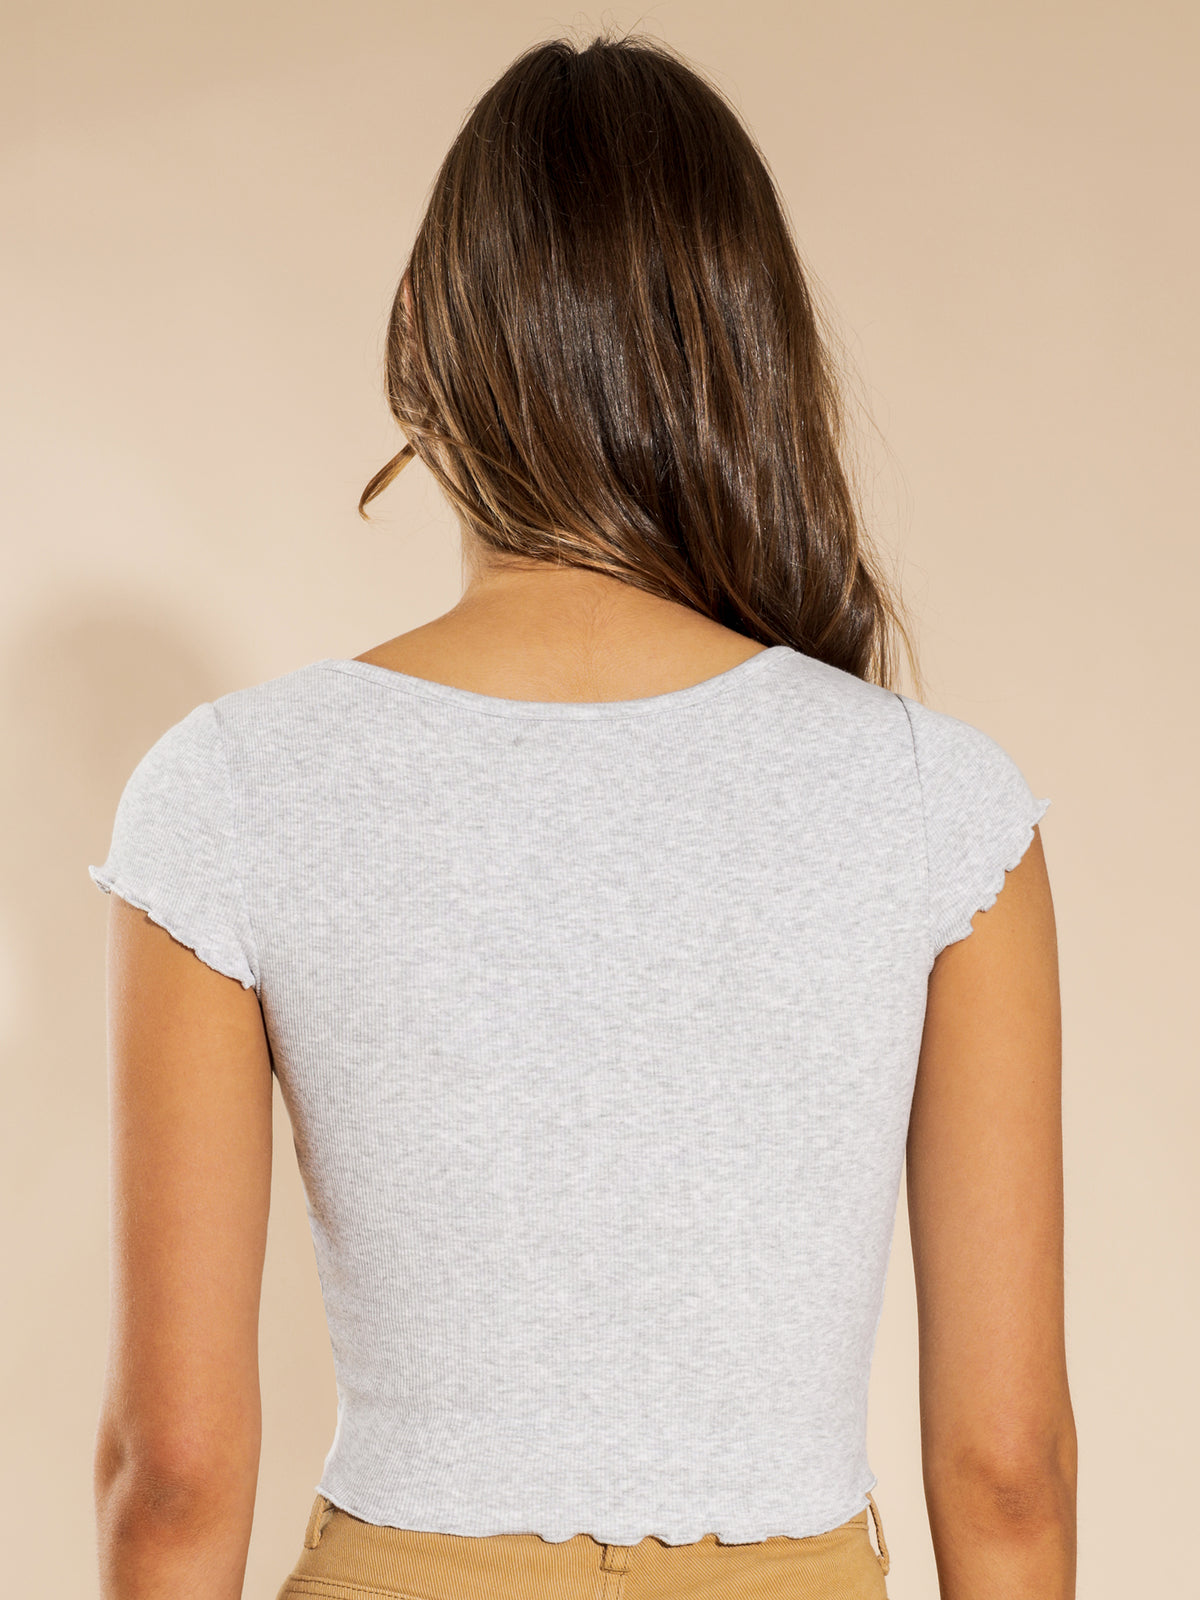 Freya Ruched Front T-Shirt in Grey Marle